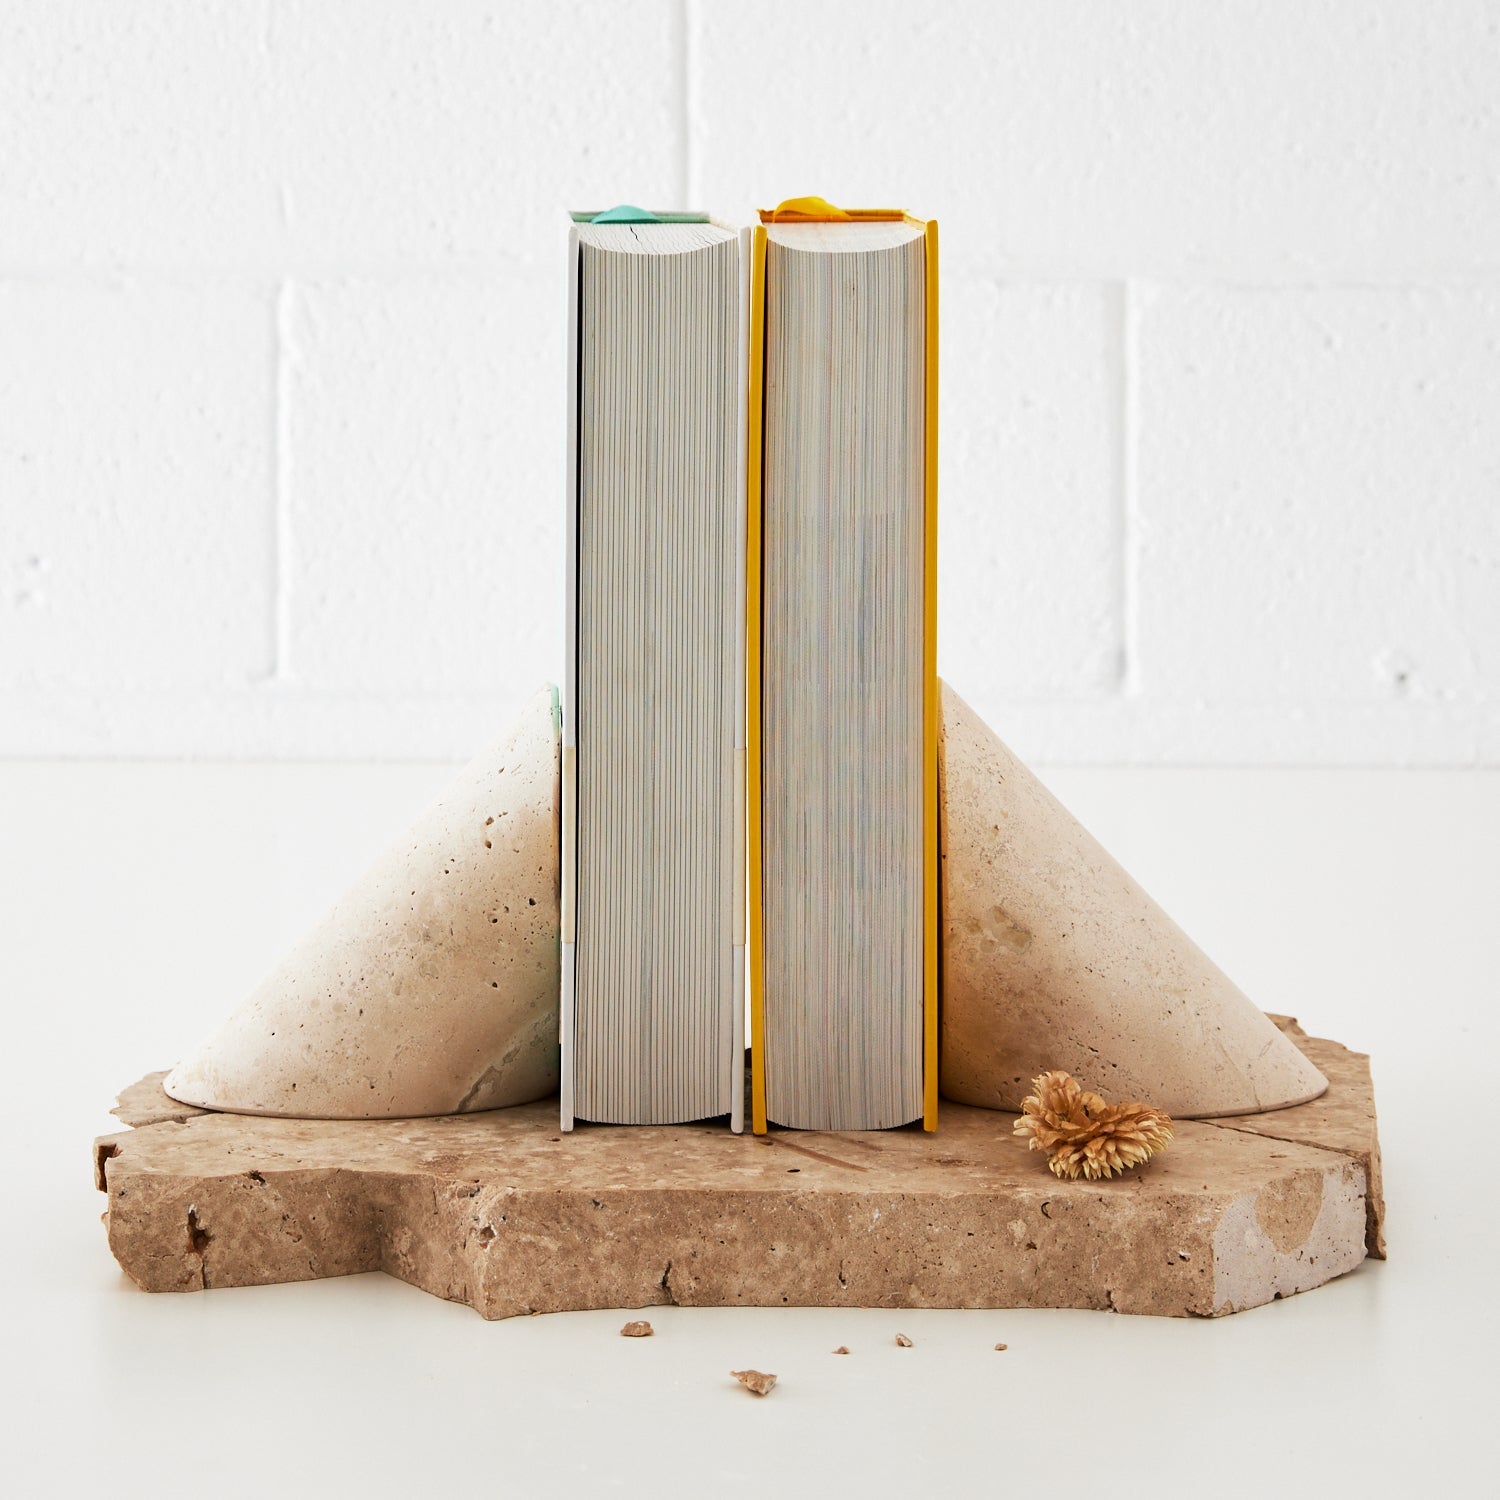 Travertine Stone Bookends KAILE